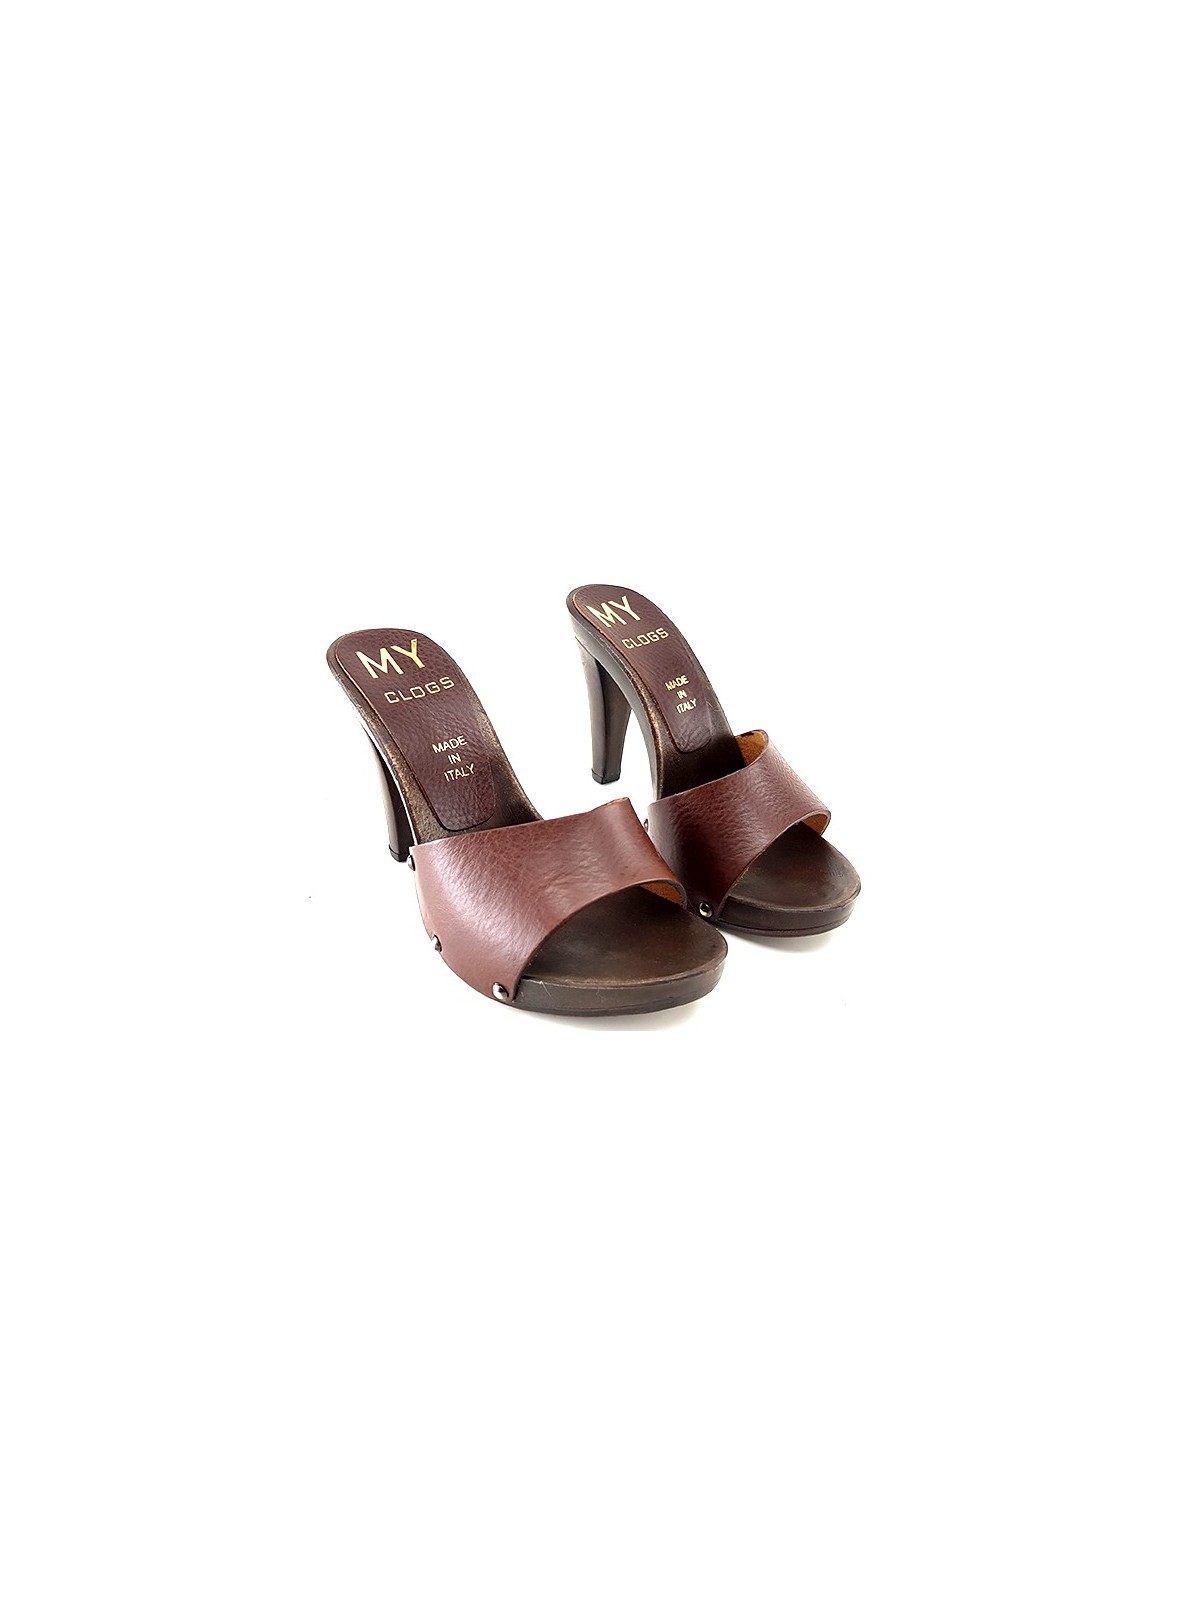 CLOGS SUEDE LEATHER MADE IN ITALY